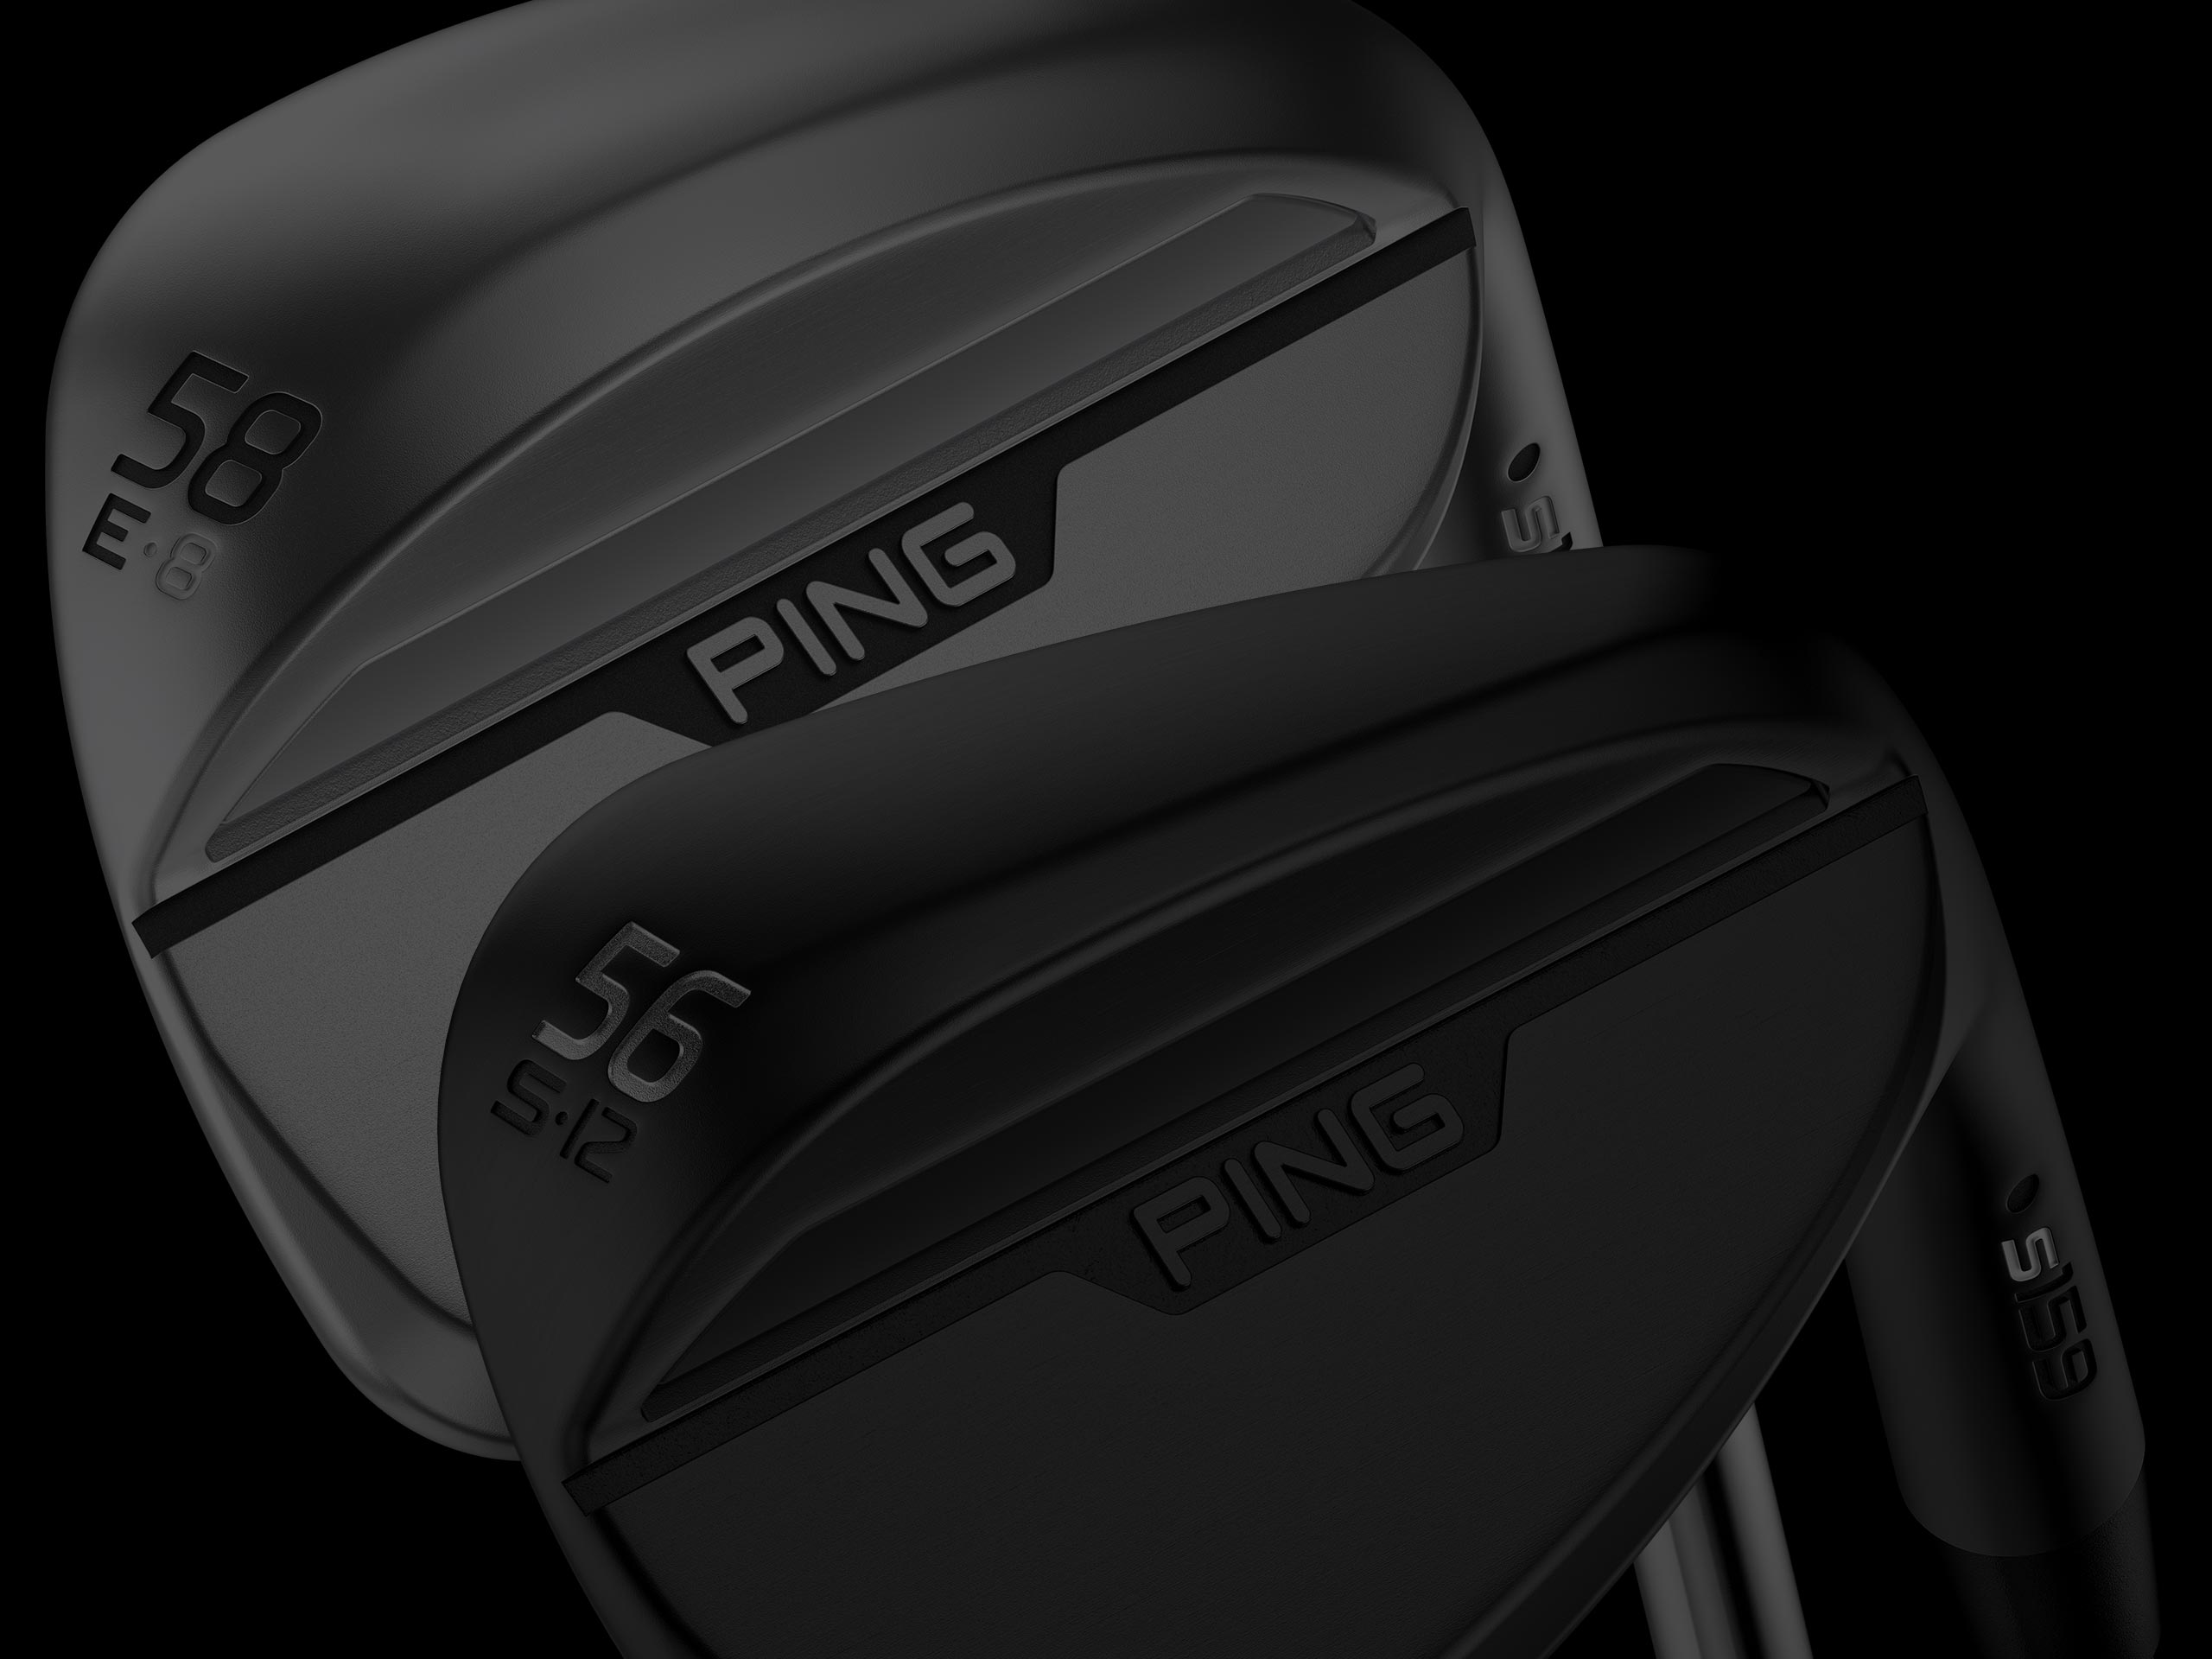 Ping Wedges Background Image.